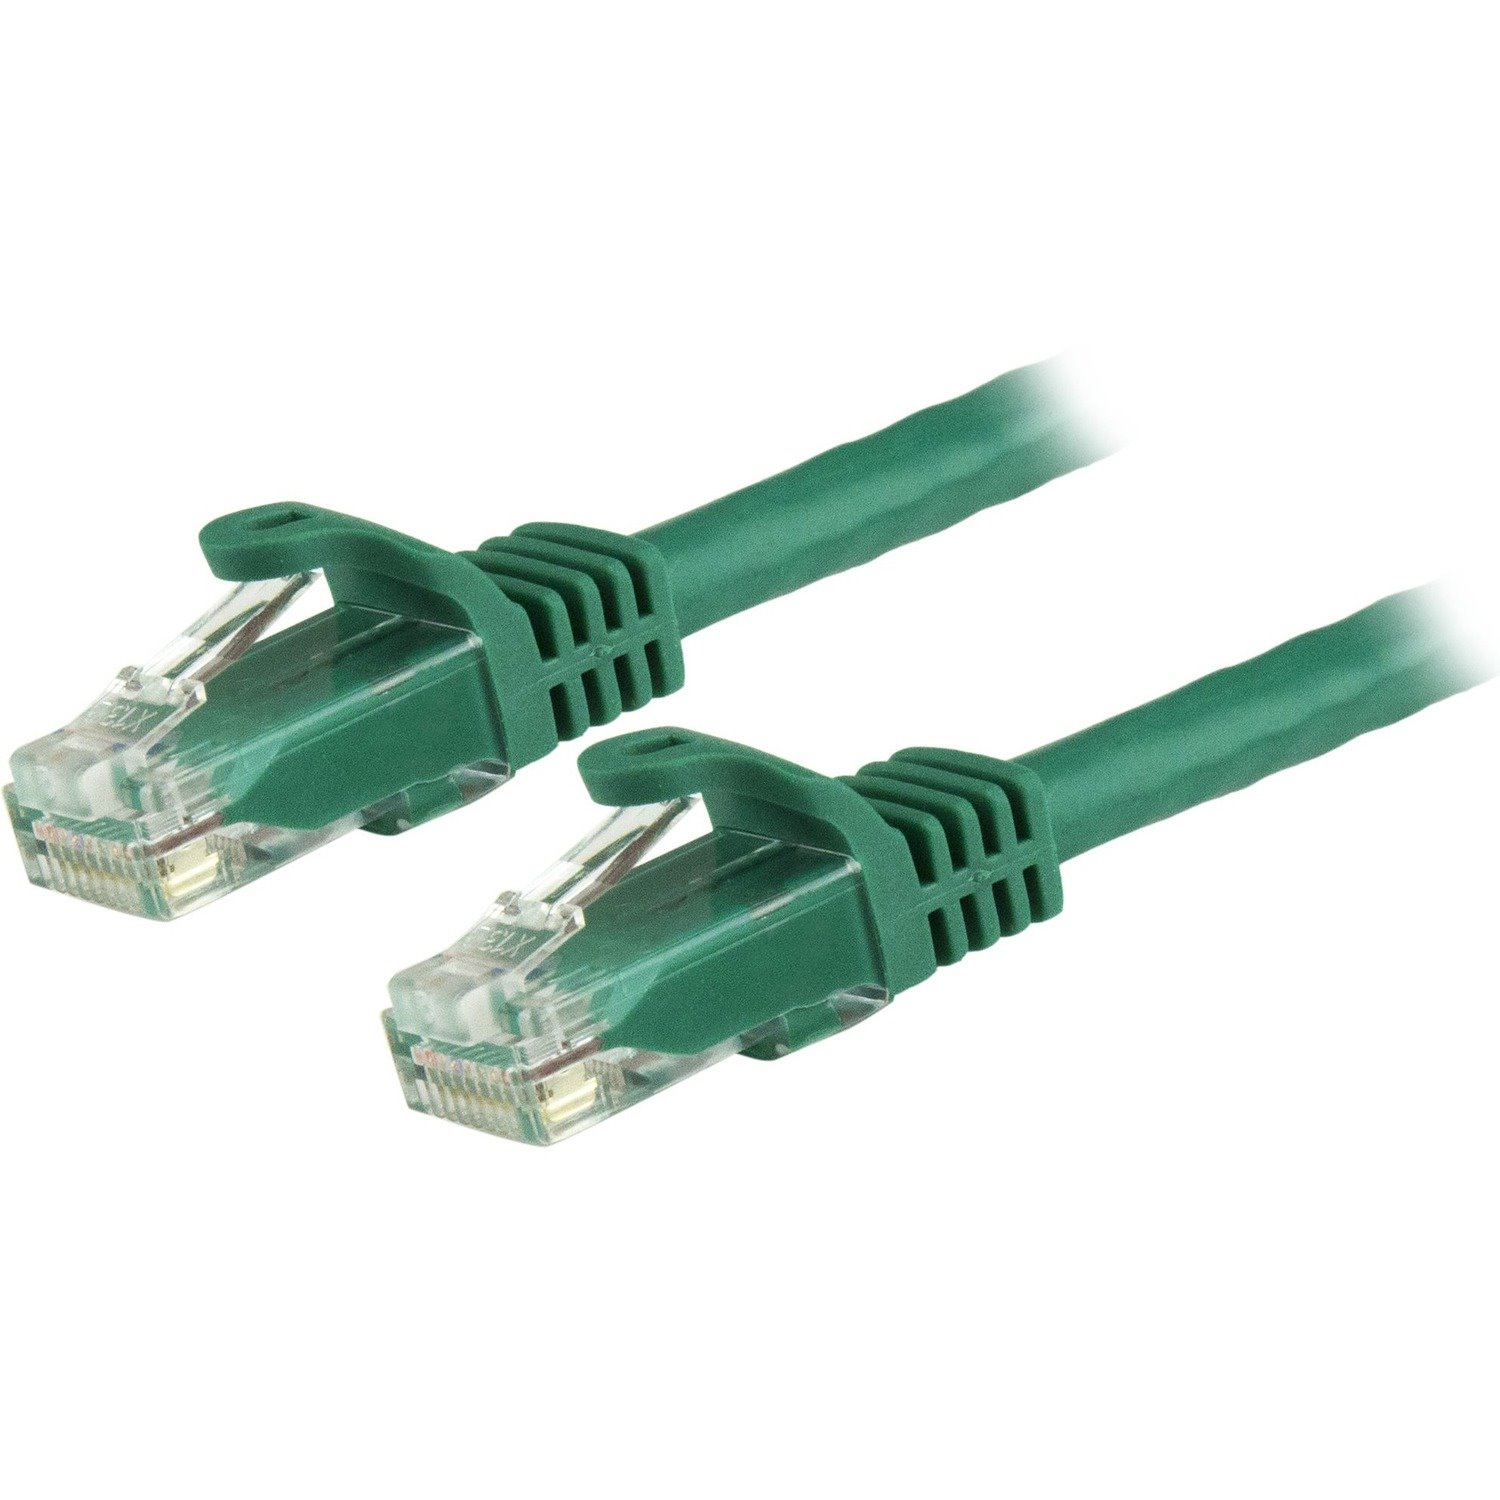 StarTech.com 3 m Category 6 Network Cable for Network Device - 1